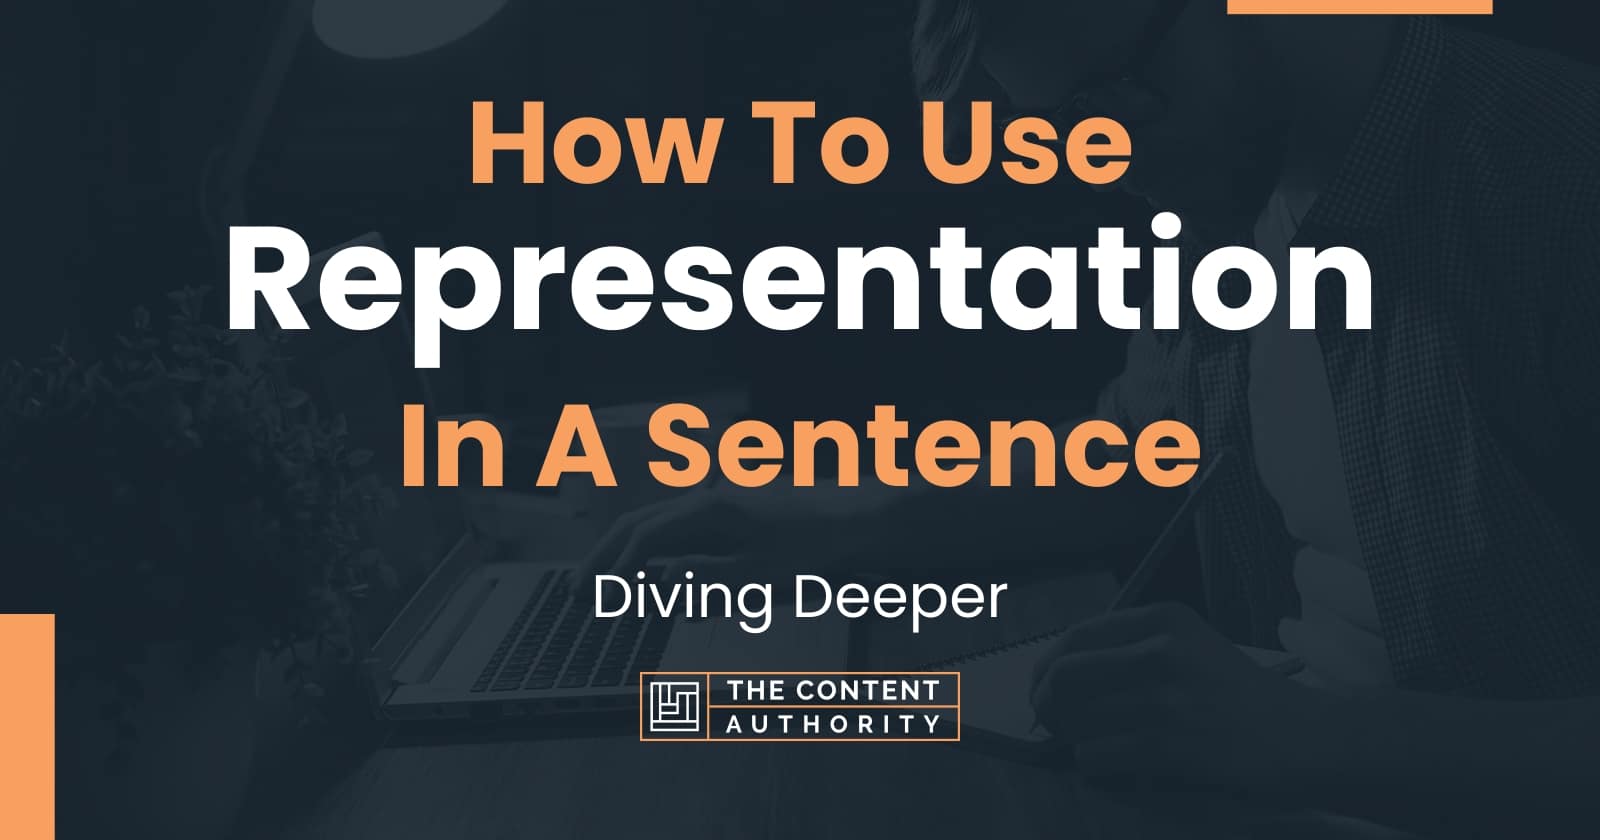 meaning of representation and sentence